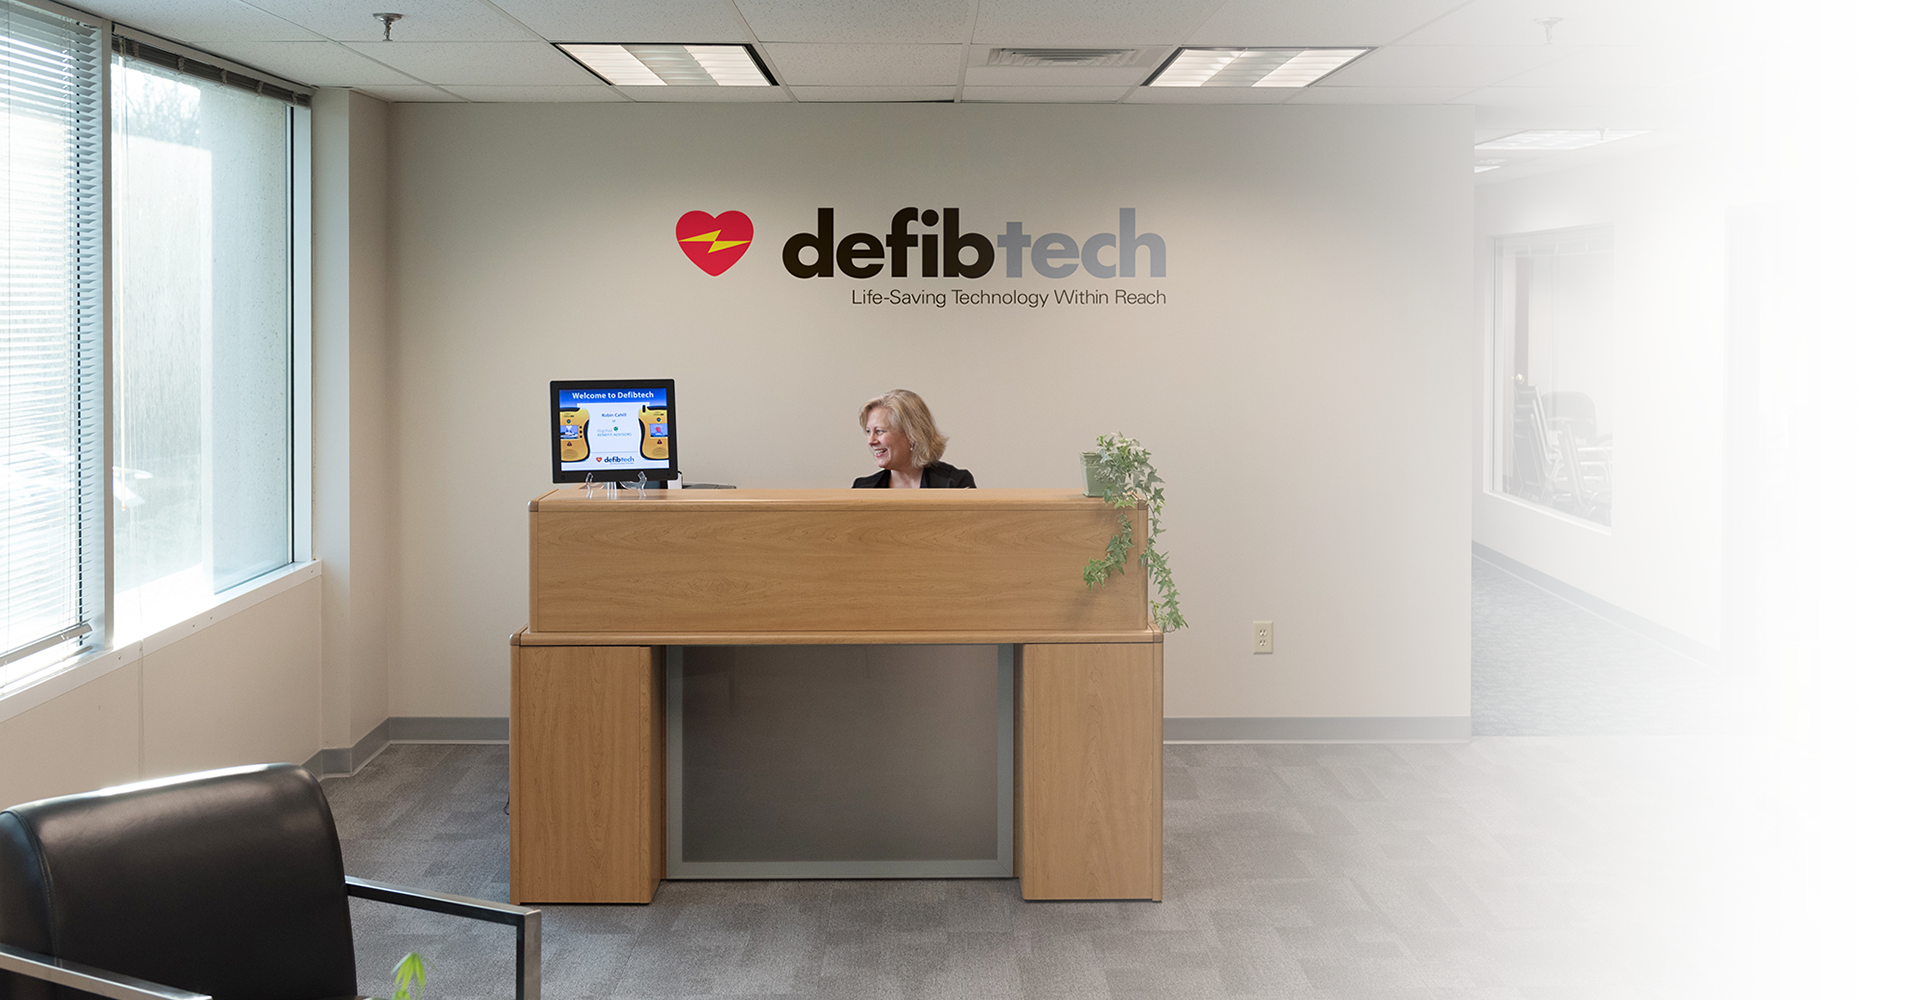 Why Defibtech